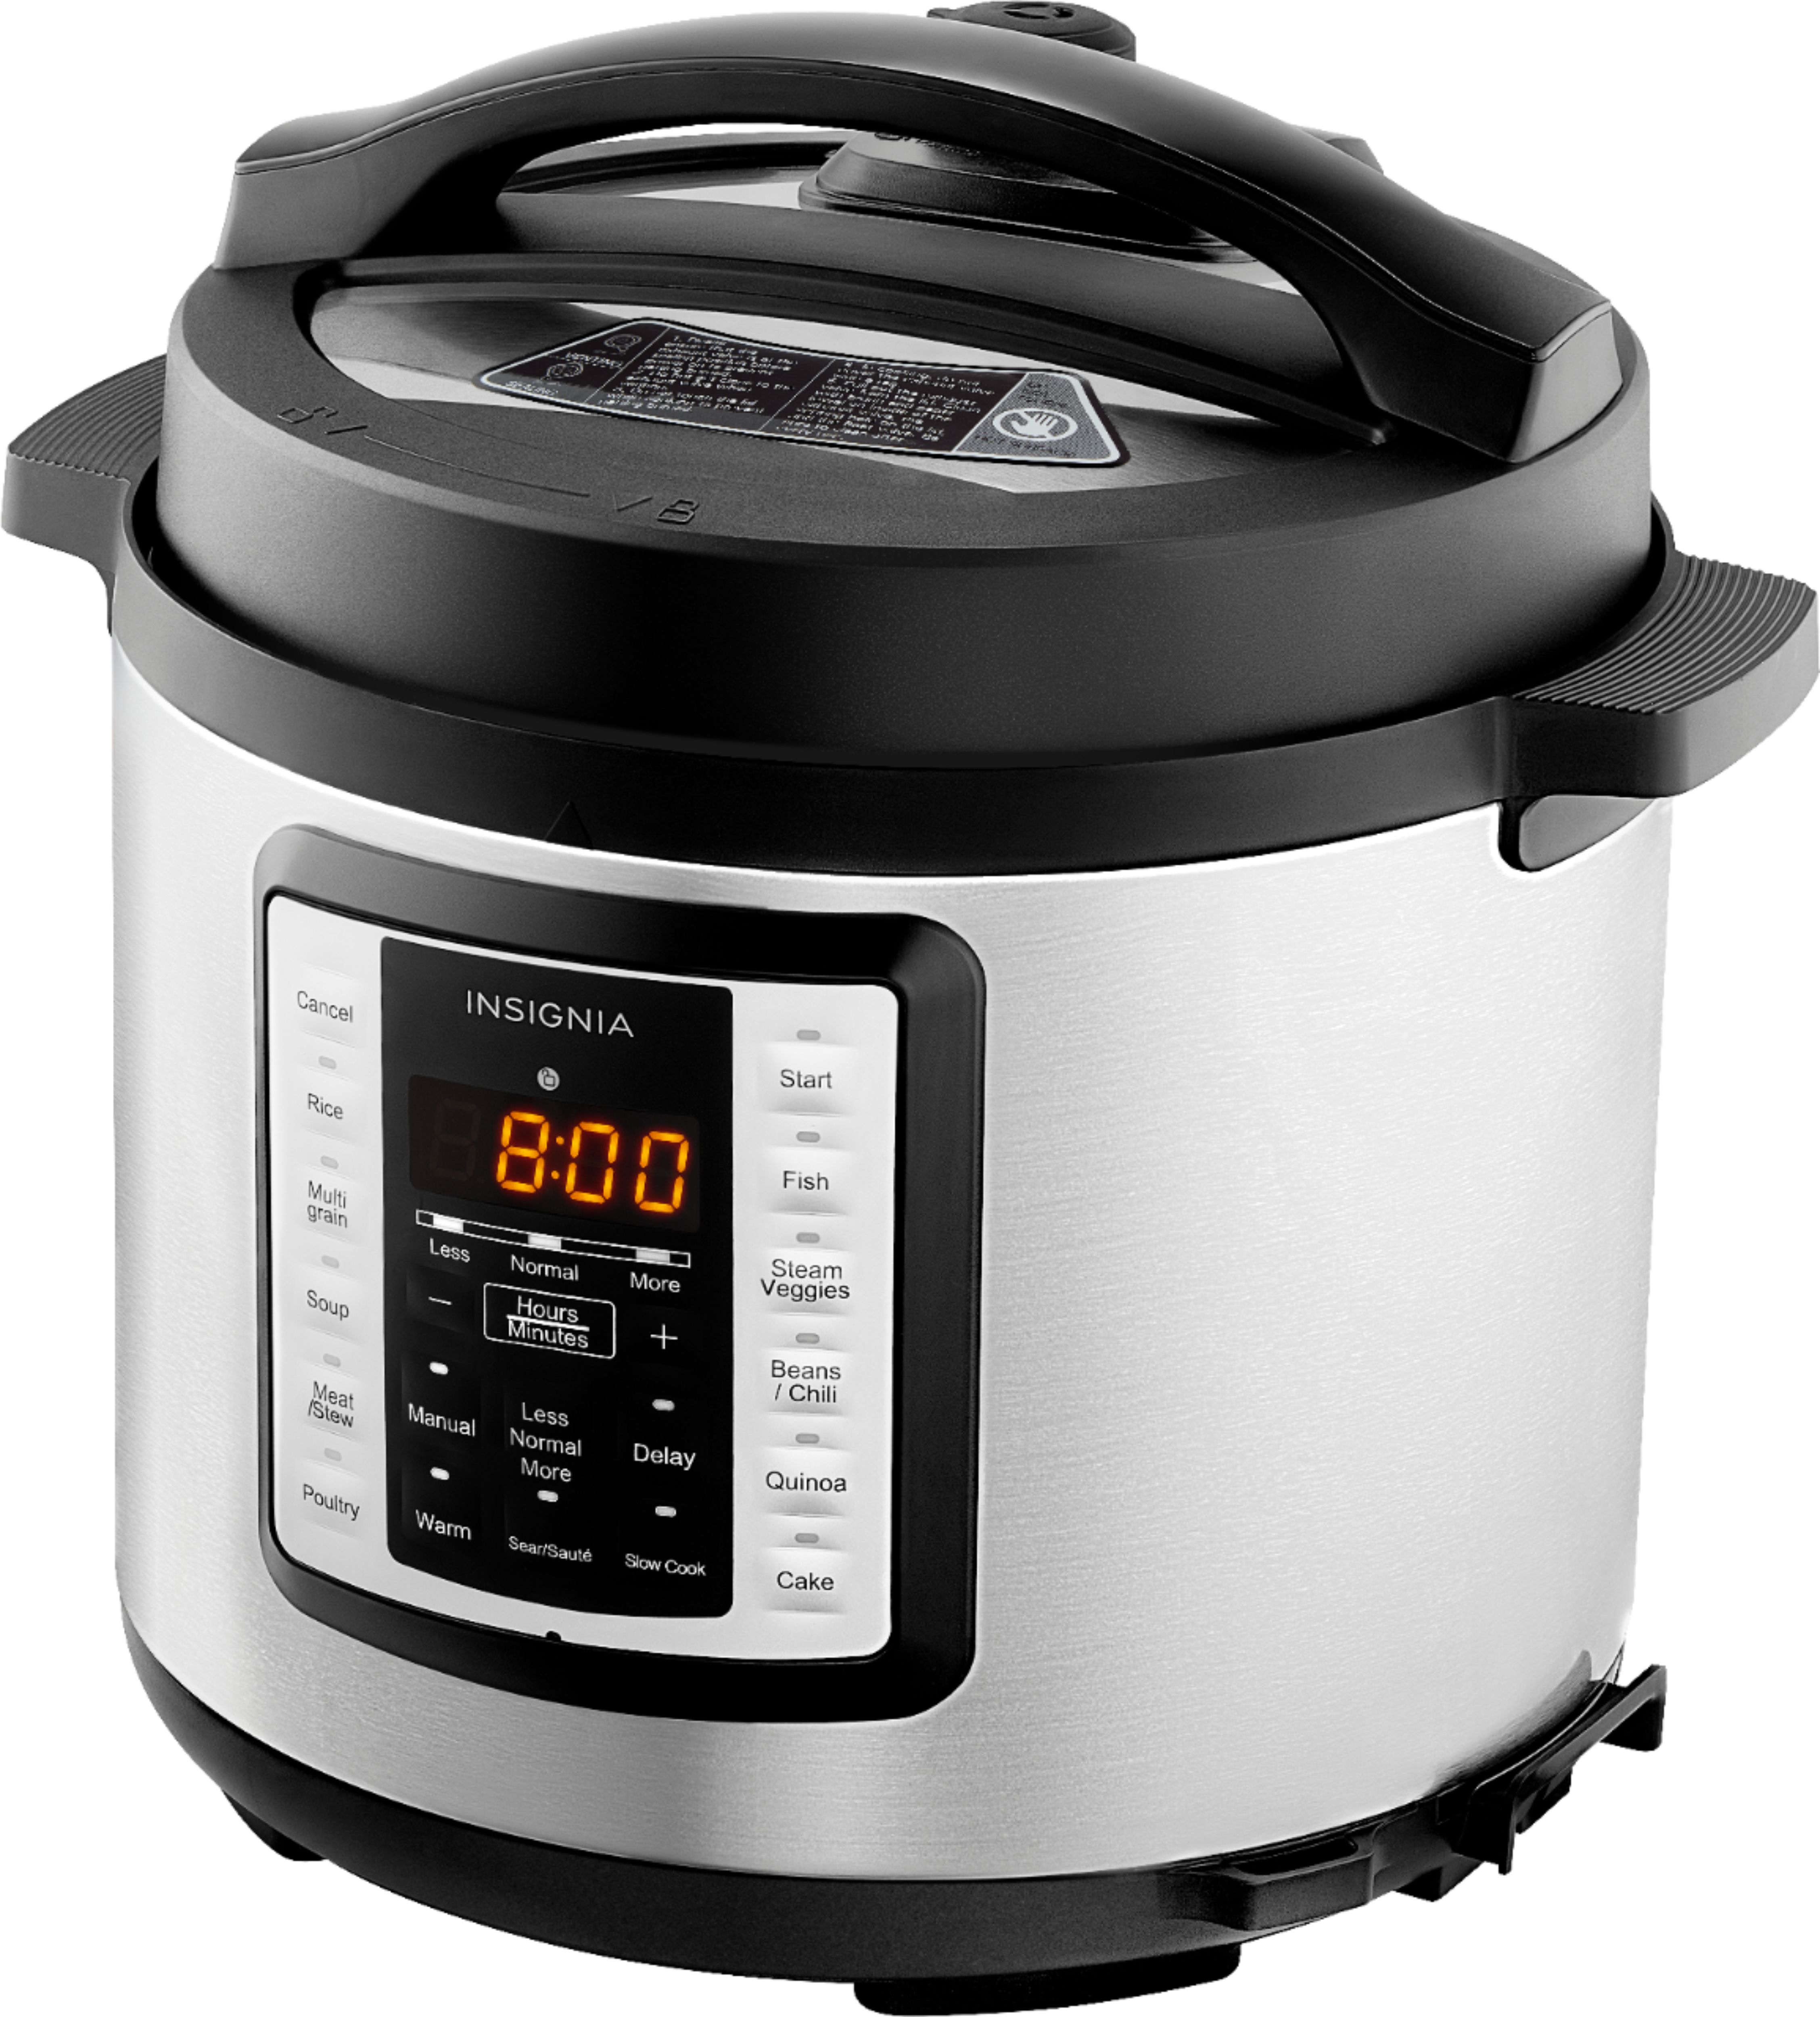 Insignia - 6qt Multi-Function Pressure Cooker - Stainless Steel, $29.99, free store pickup, Best Buy